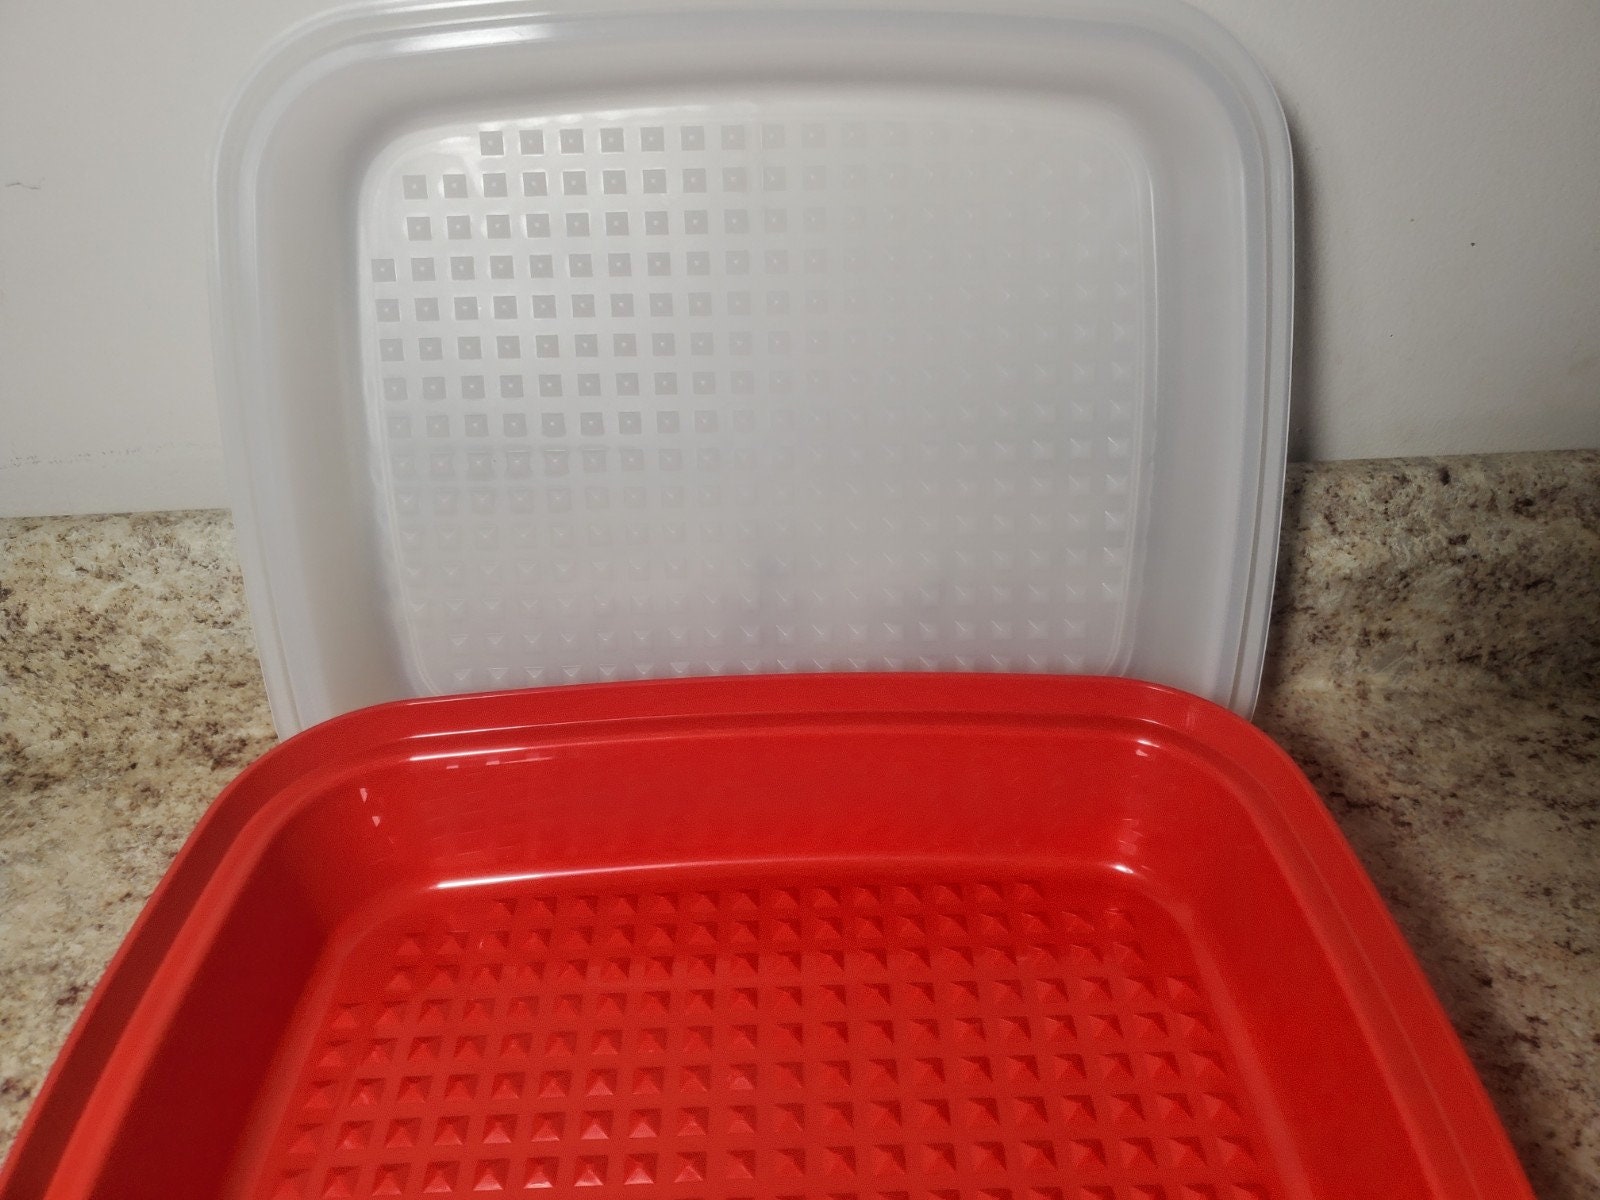 TUPPERWARE Season Serve Large Marinade Container Passion Red Brand